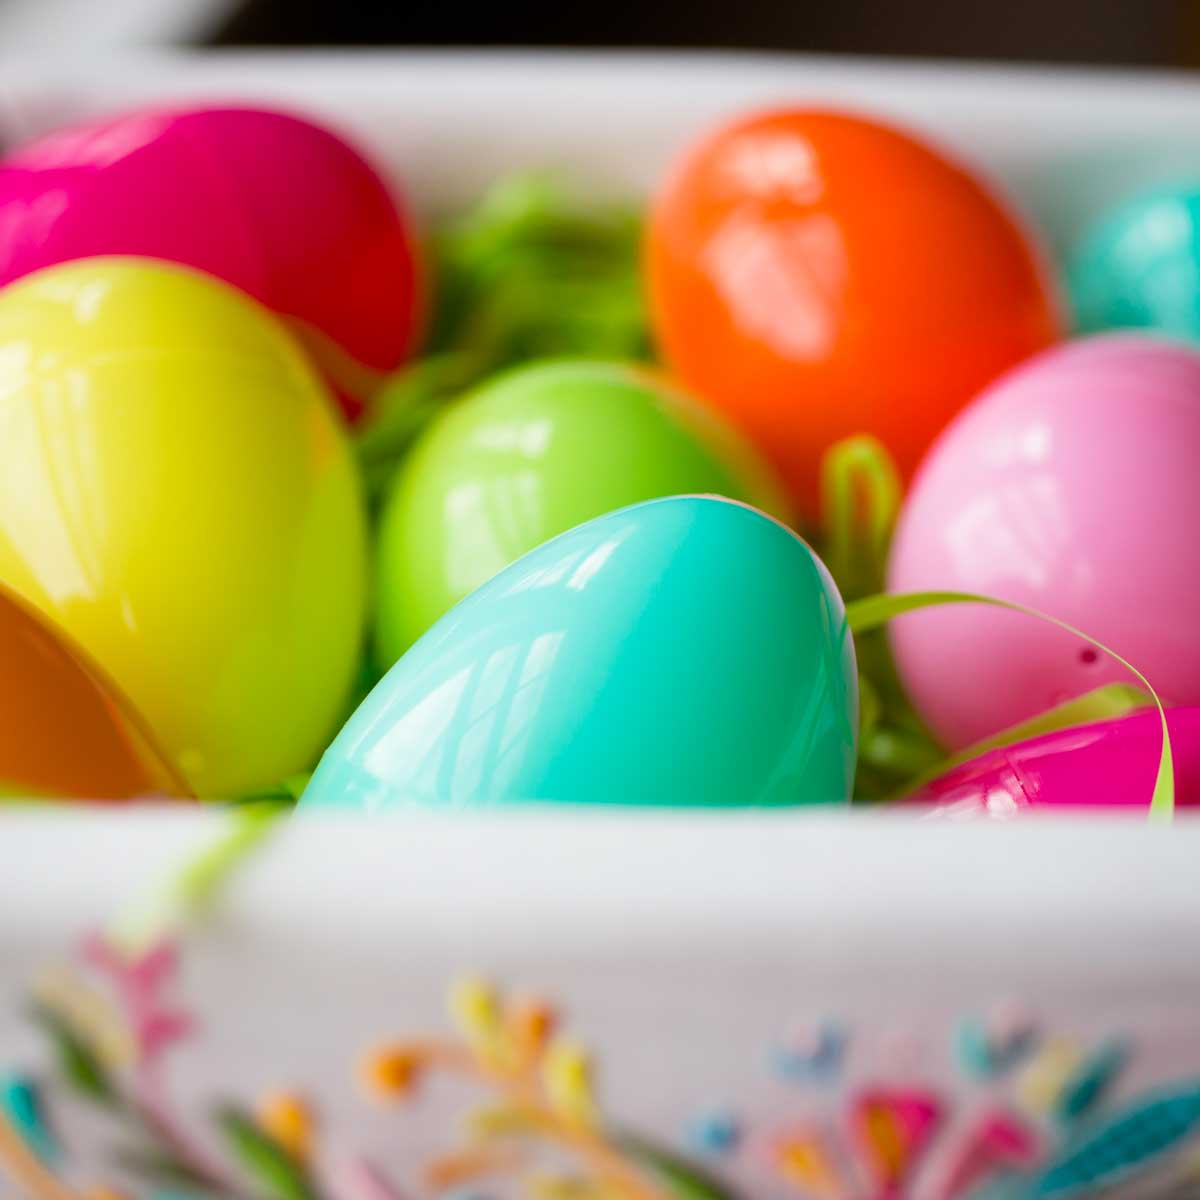 Colorful plastic Easter eggs in a lined basket.